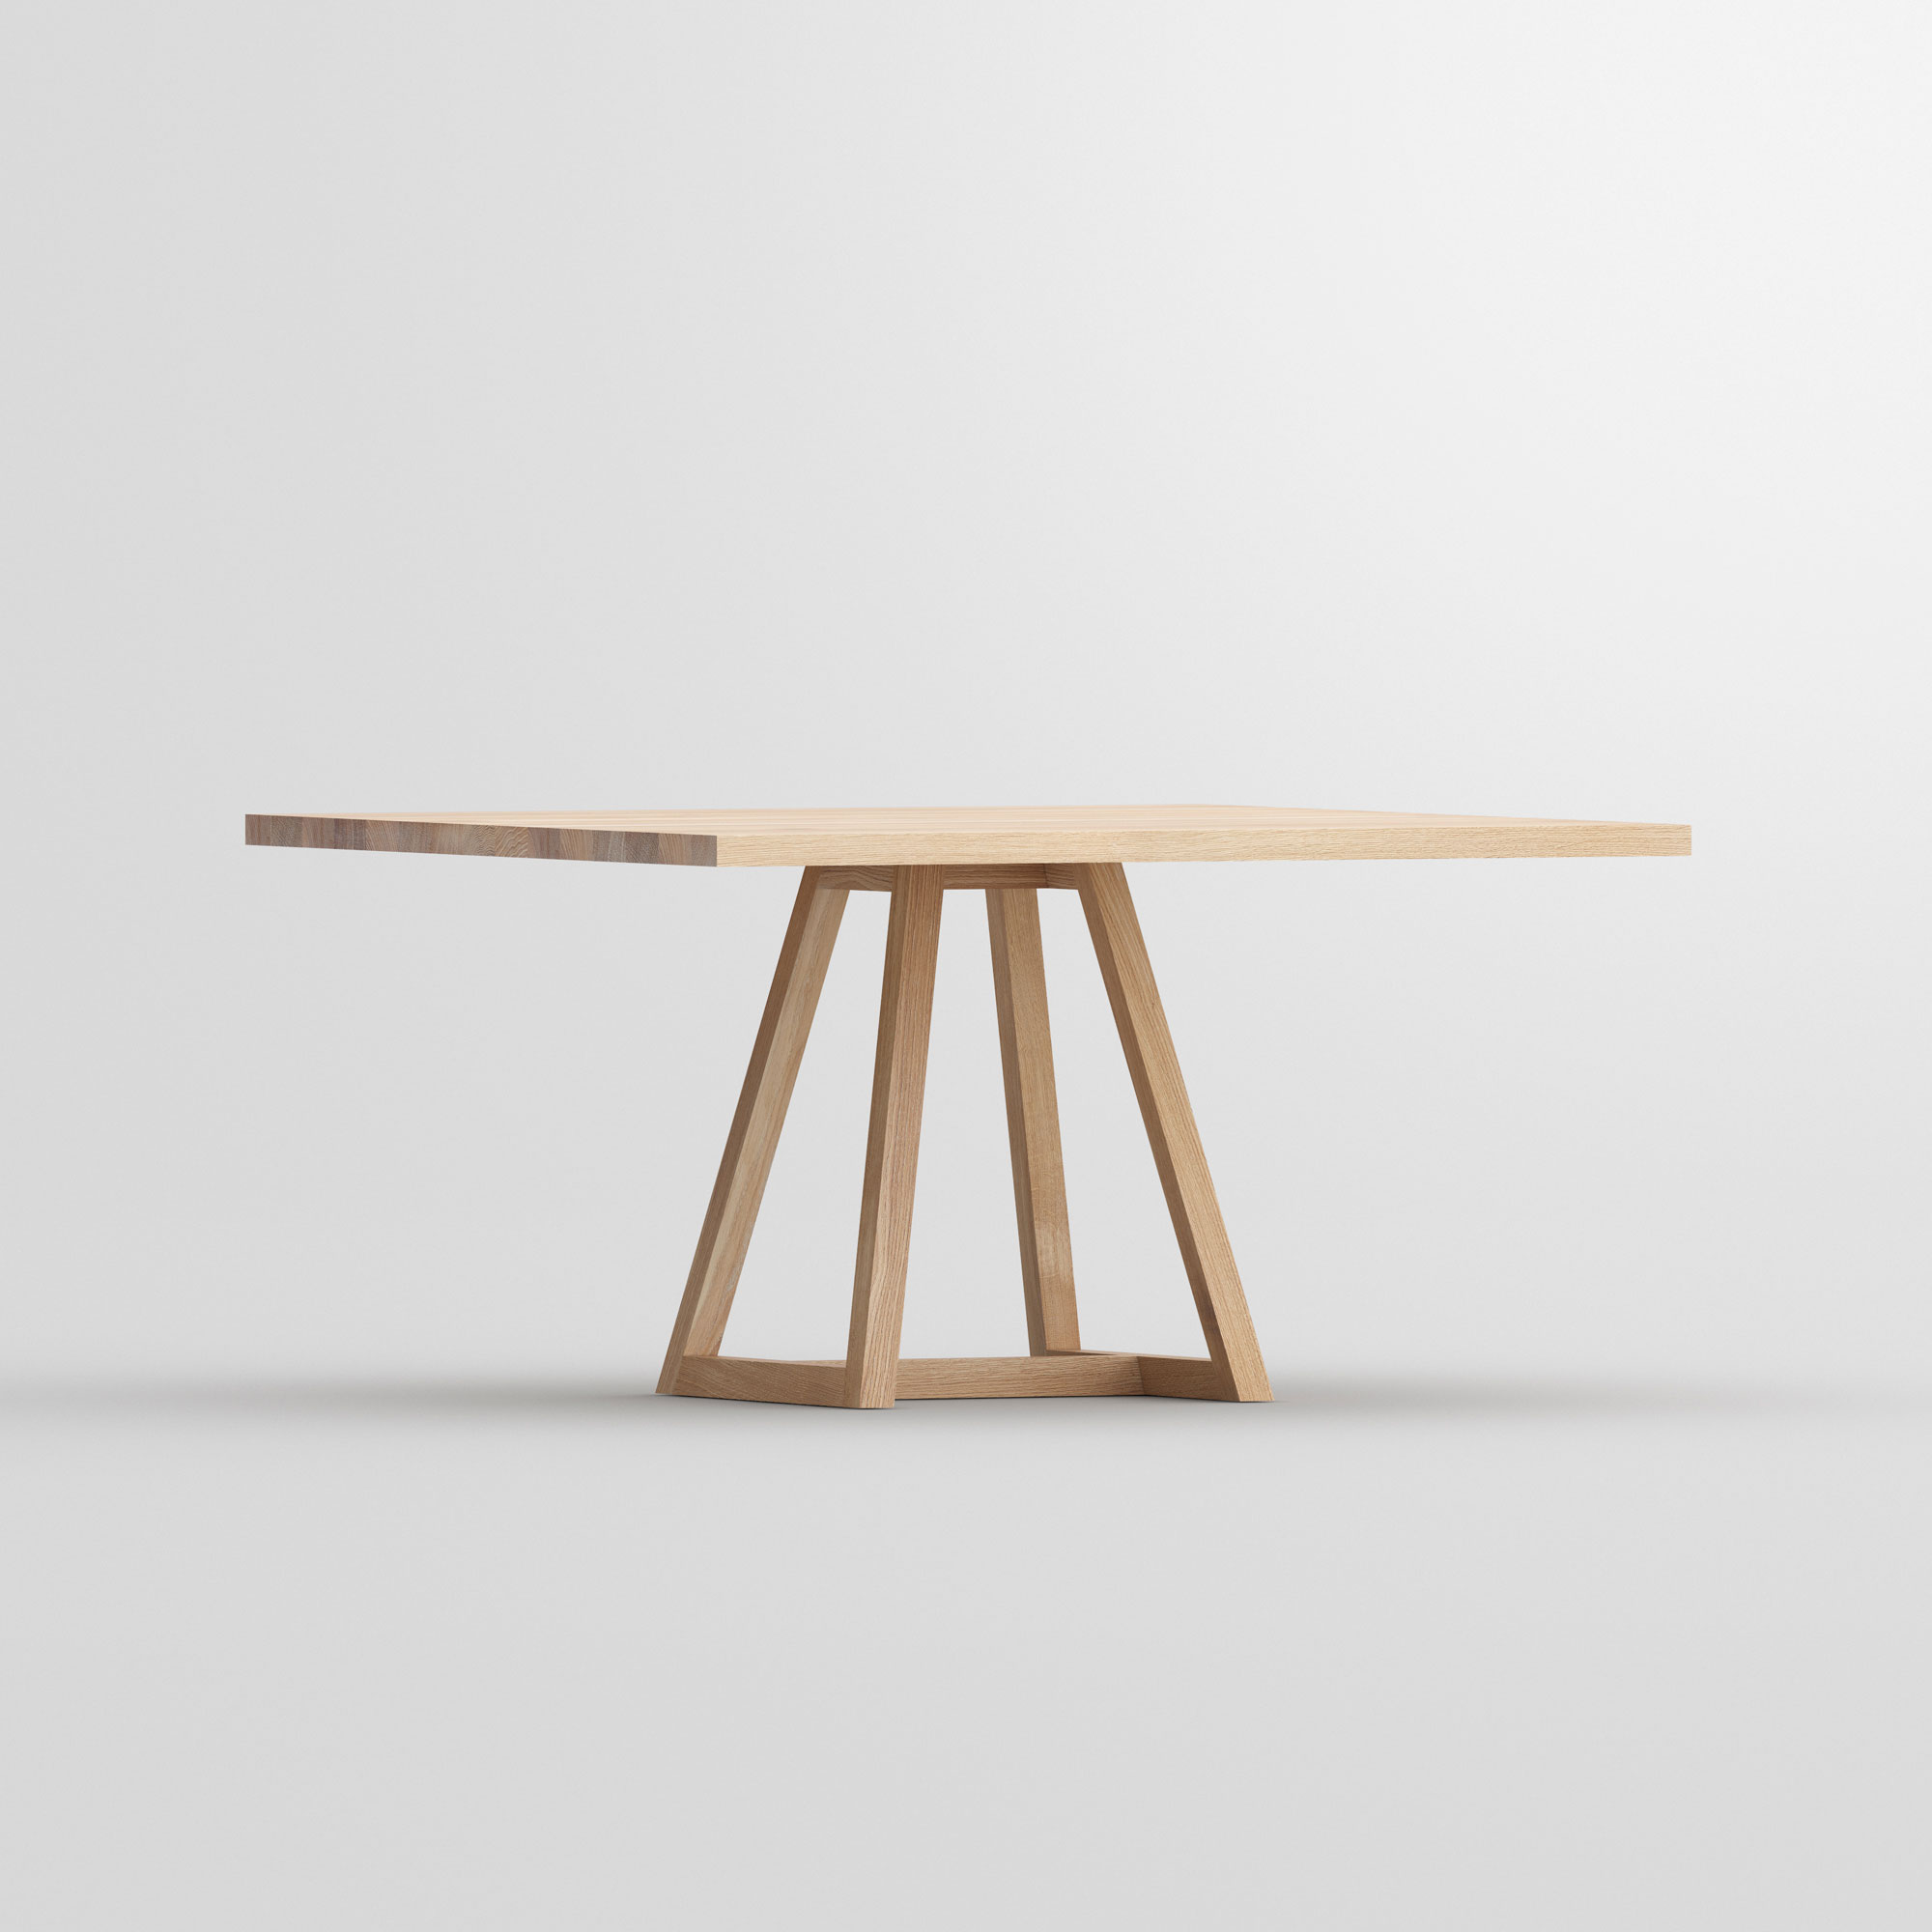 Square Table MARGO SQUARE cam2 custom made in solid wood by vitamin design